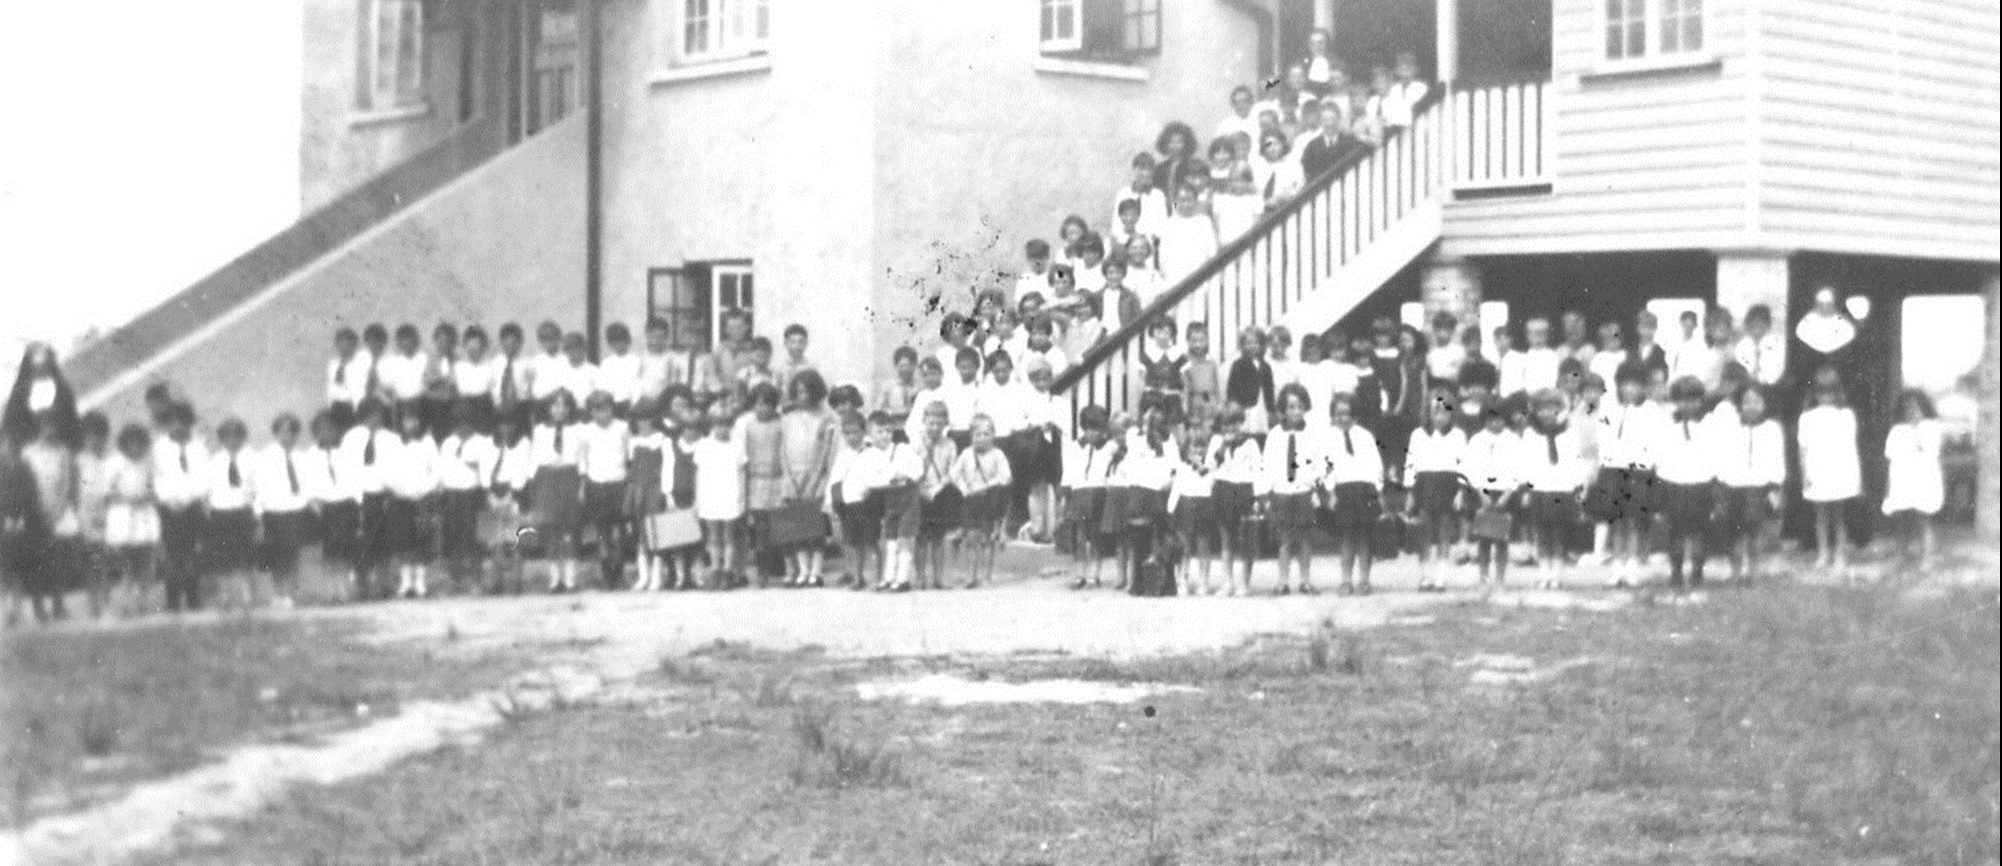 First Day of School at St Anthony's Kedron 1930.jpeg